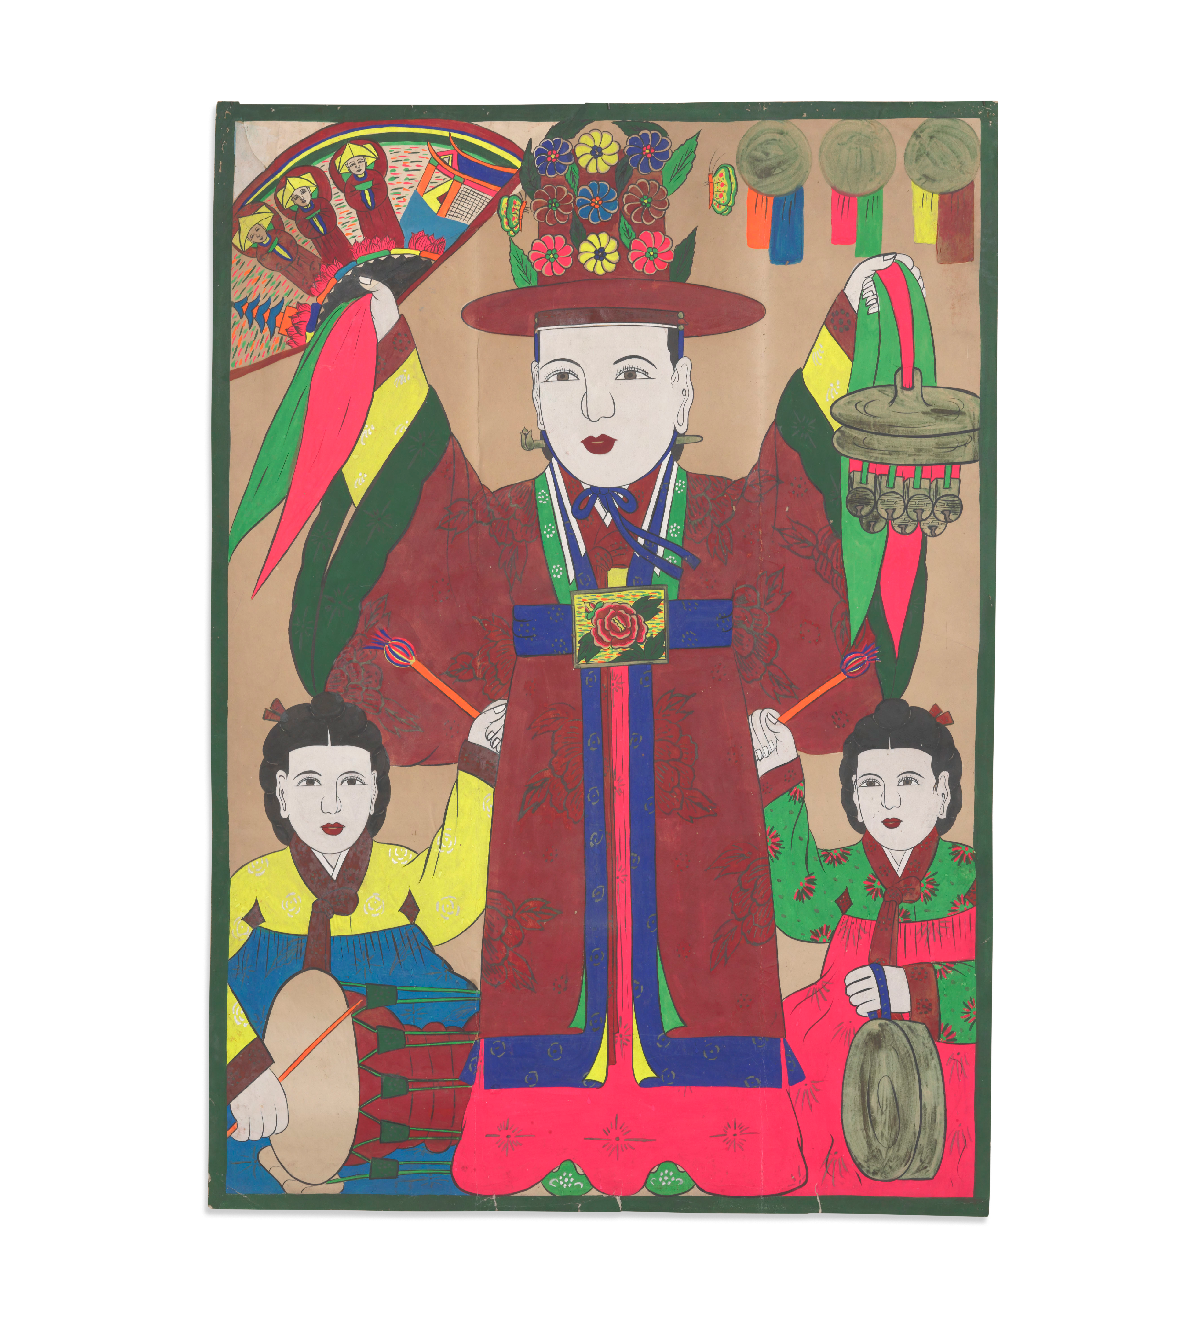 Shaman Painting of a Guardian God, ca. 20th century